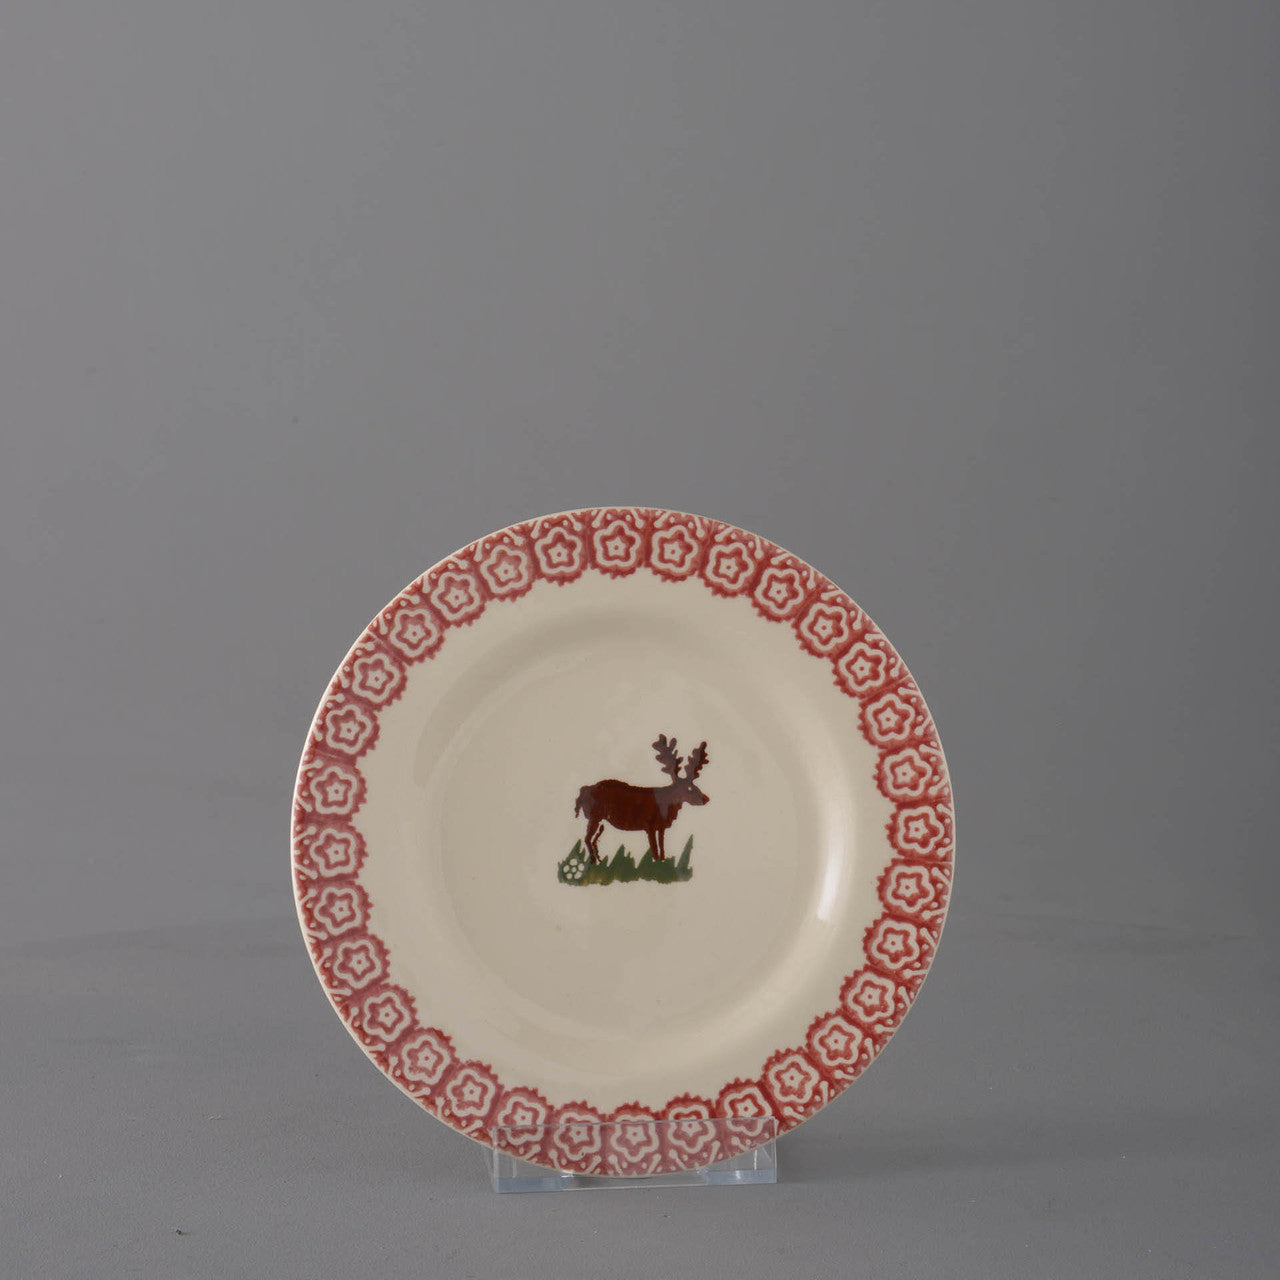 Brixton Pottery Reindeer handmade pottery 7 inch side plate